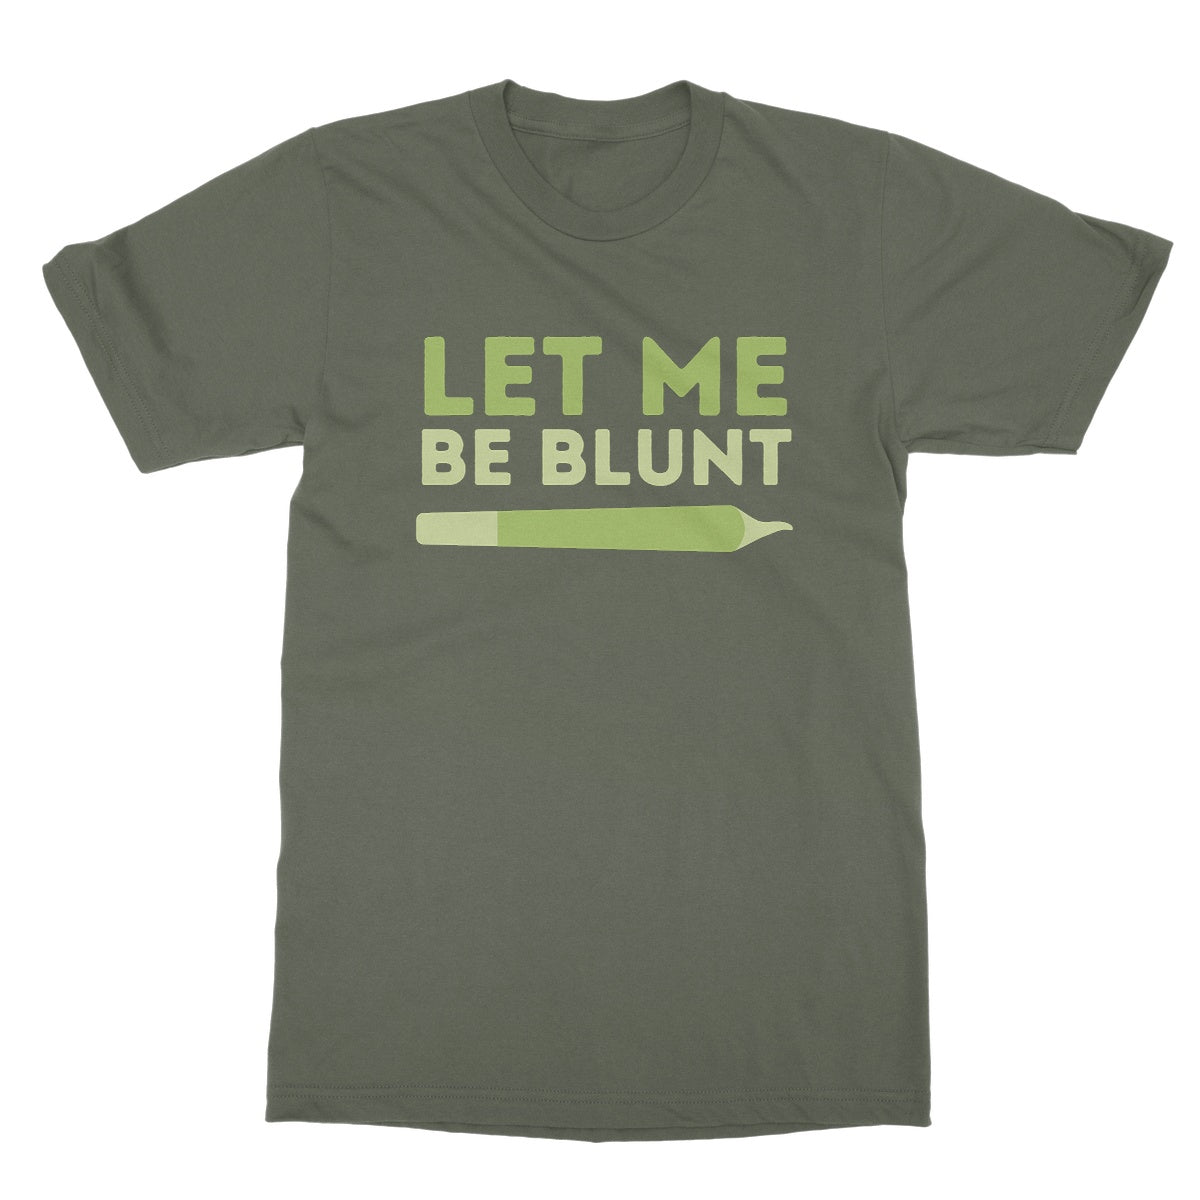 let me be blunt t shirt green